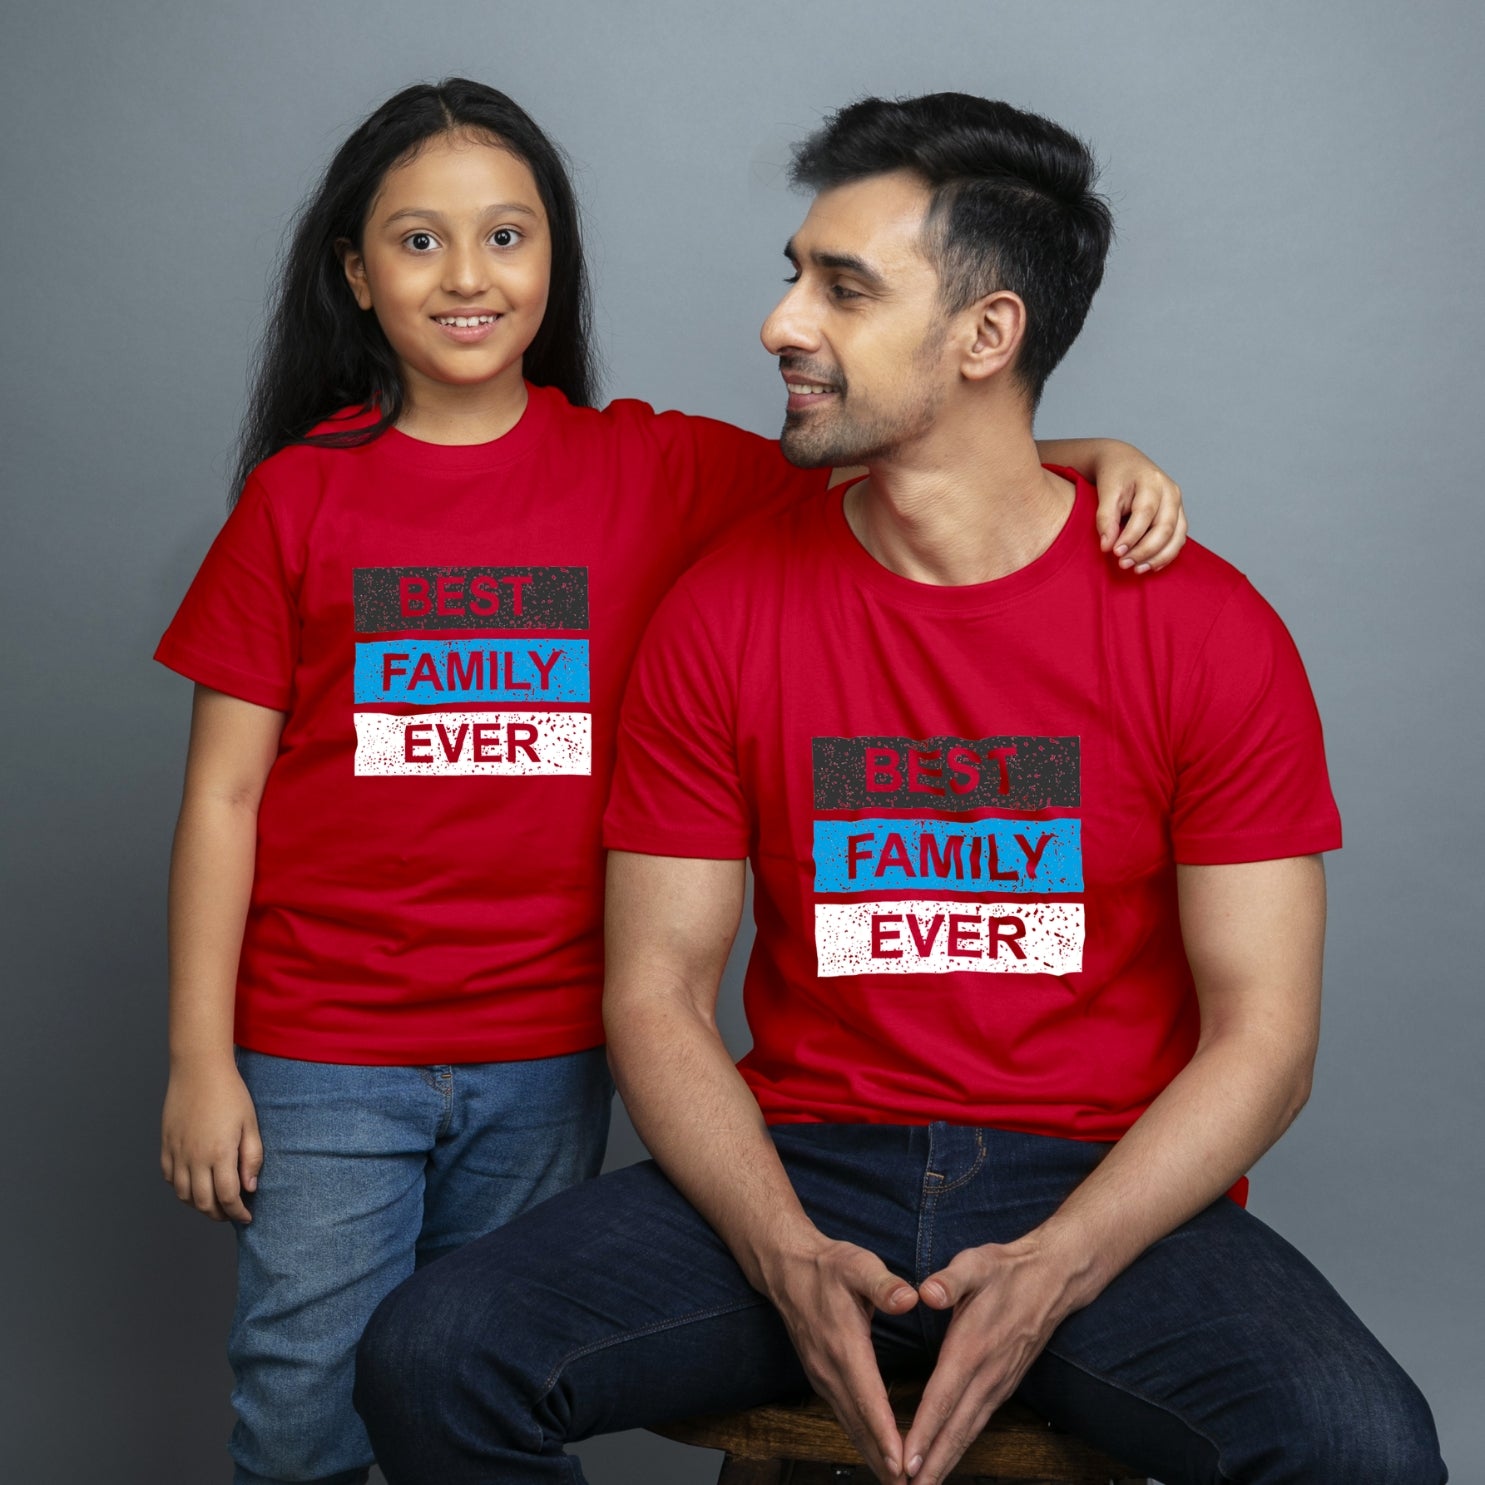 Family of 2 t shirt for Dad Daughter in Red Colour- Best Family Ever Variant